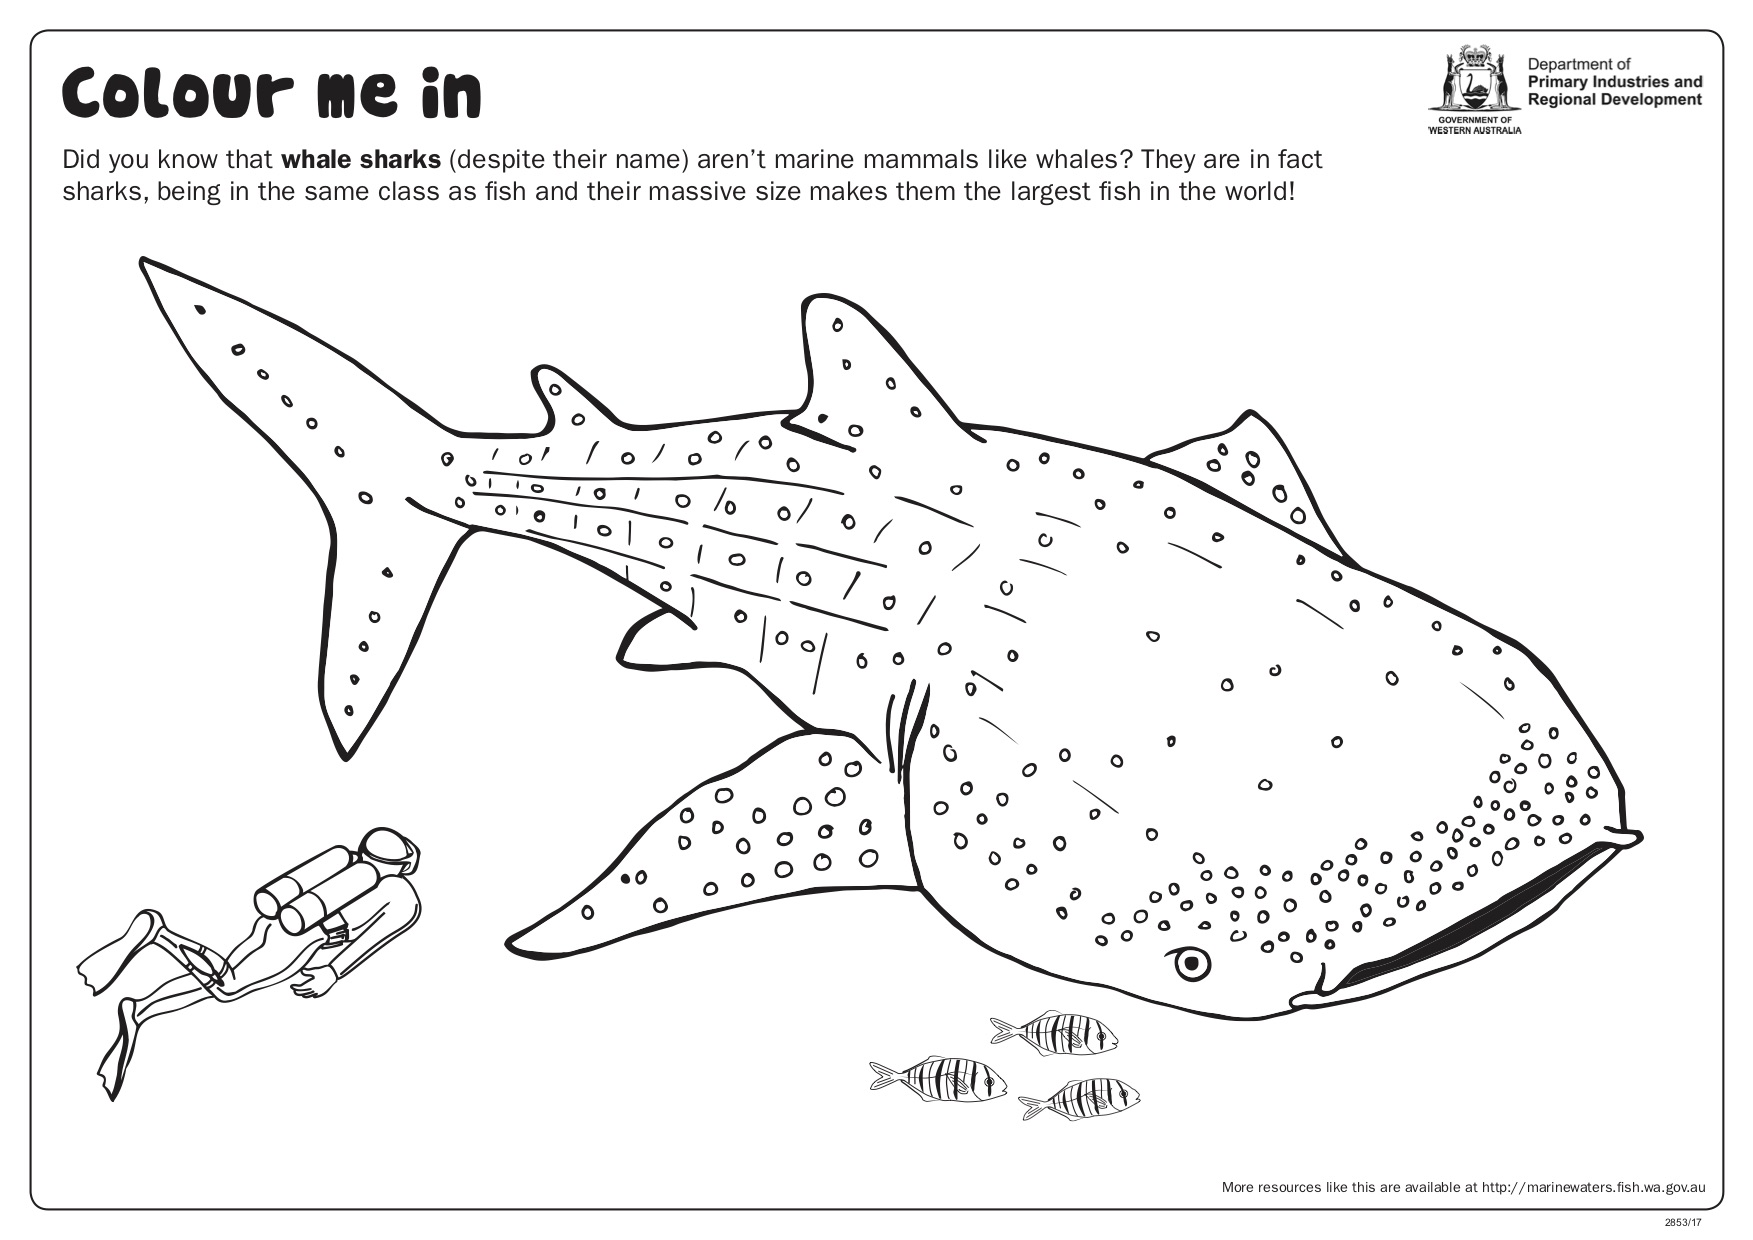 Fishy Fun Sheet Whale Shark Colour In Department of